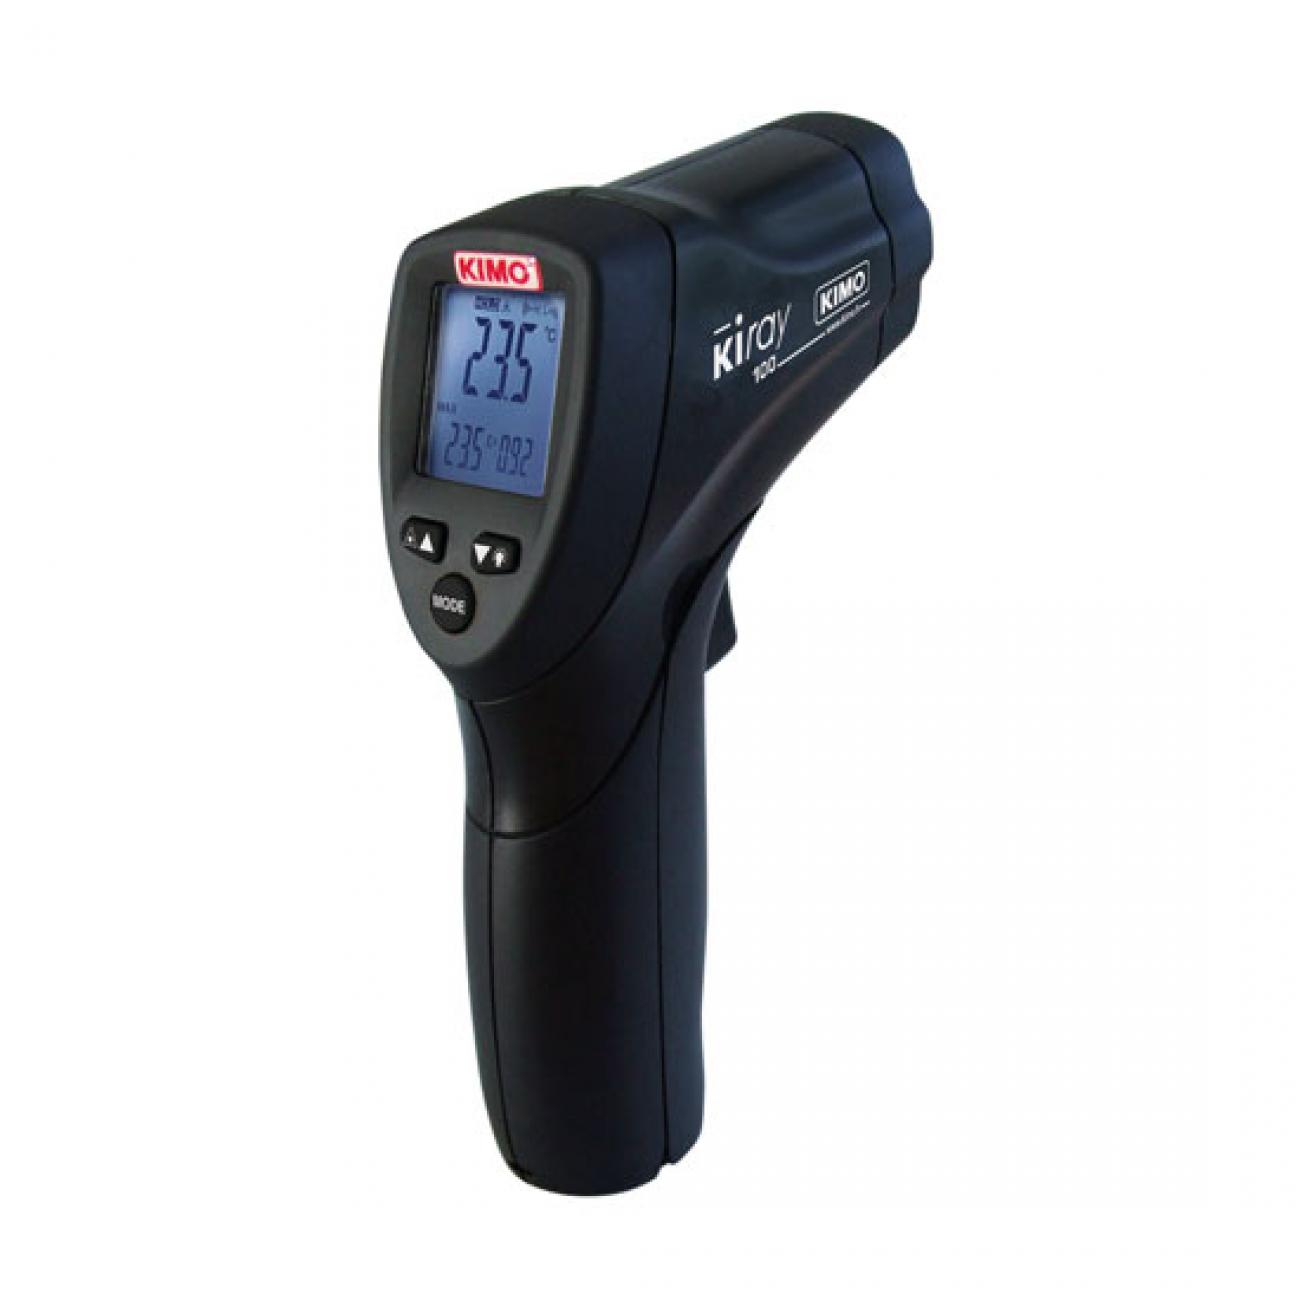 KIRAY 100 Infrared Thermometer